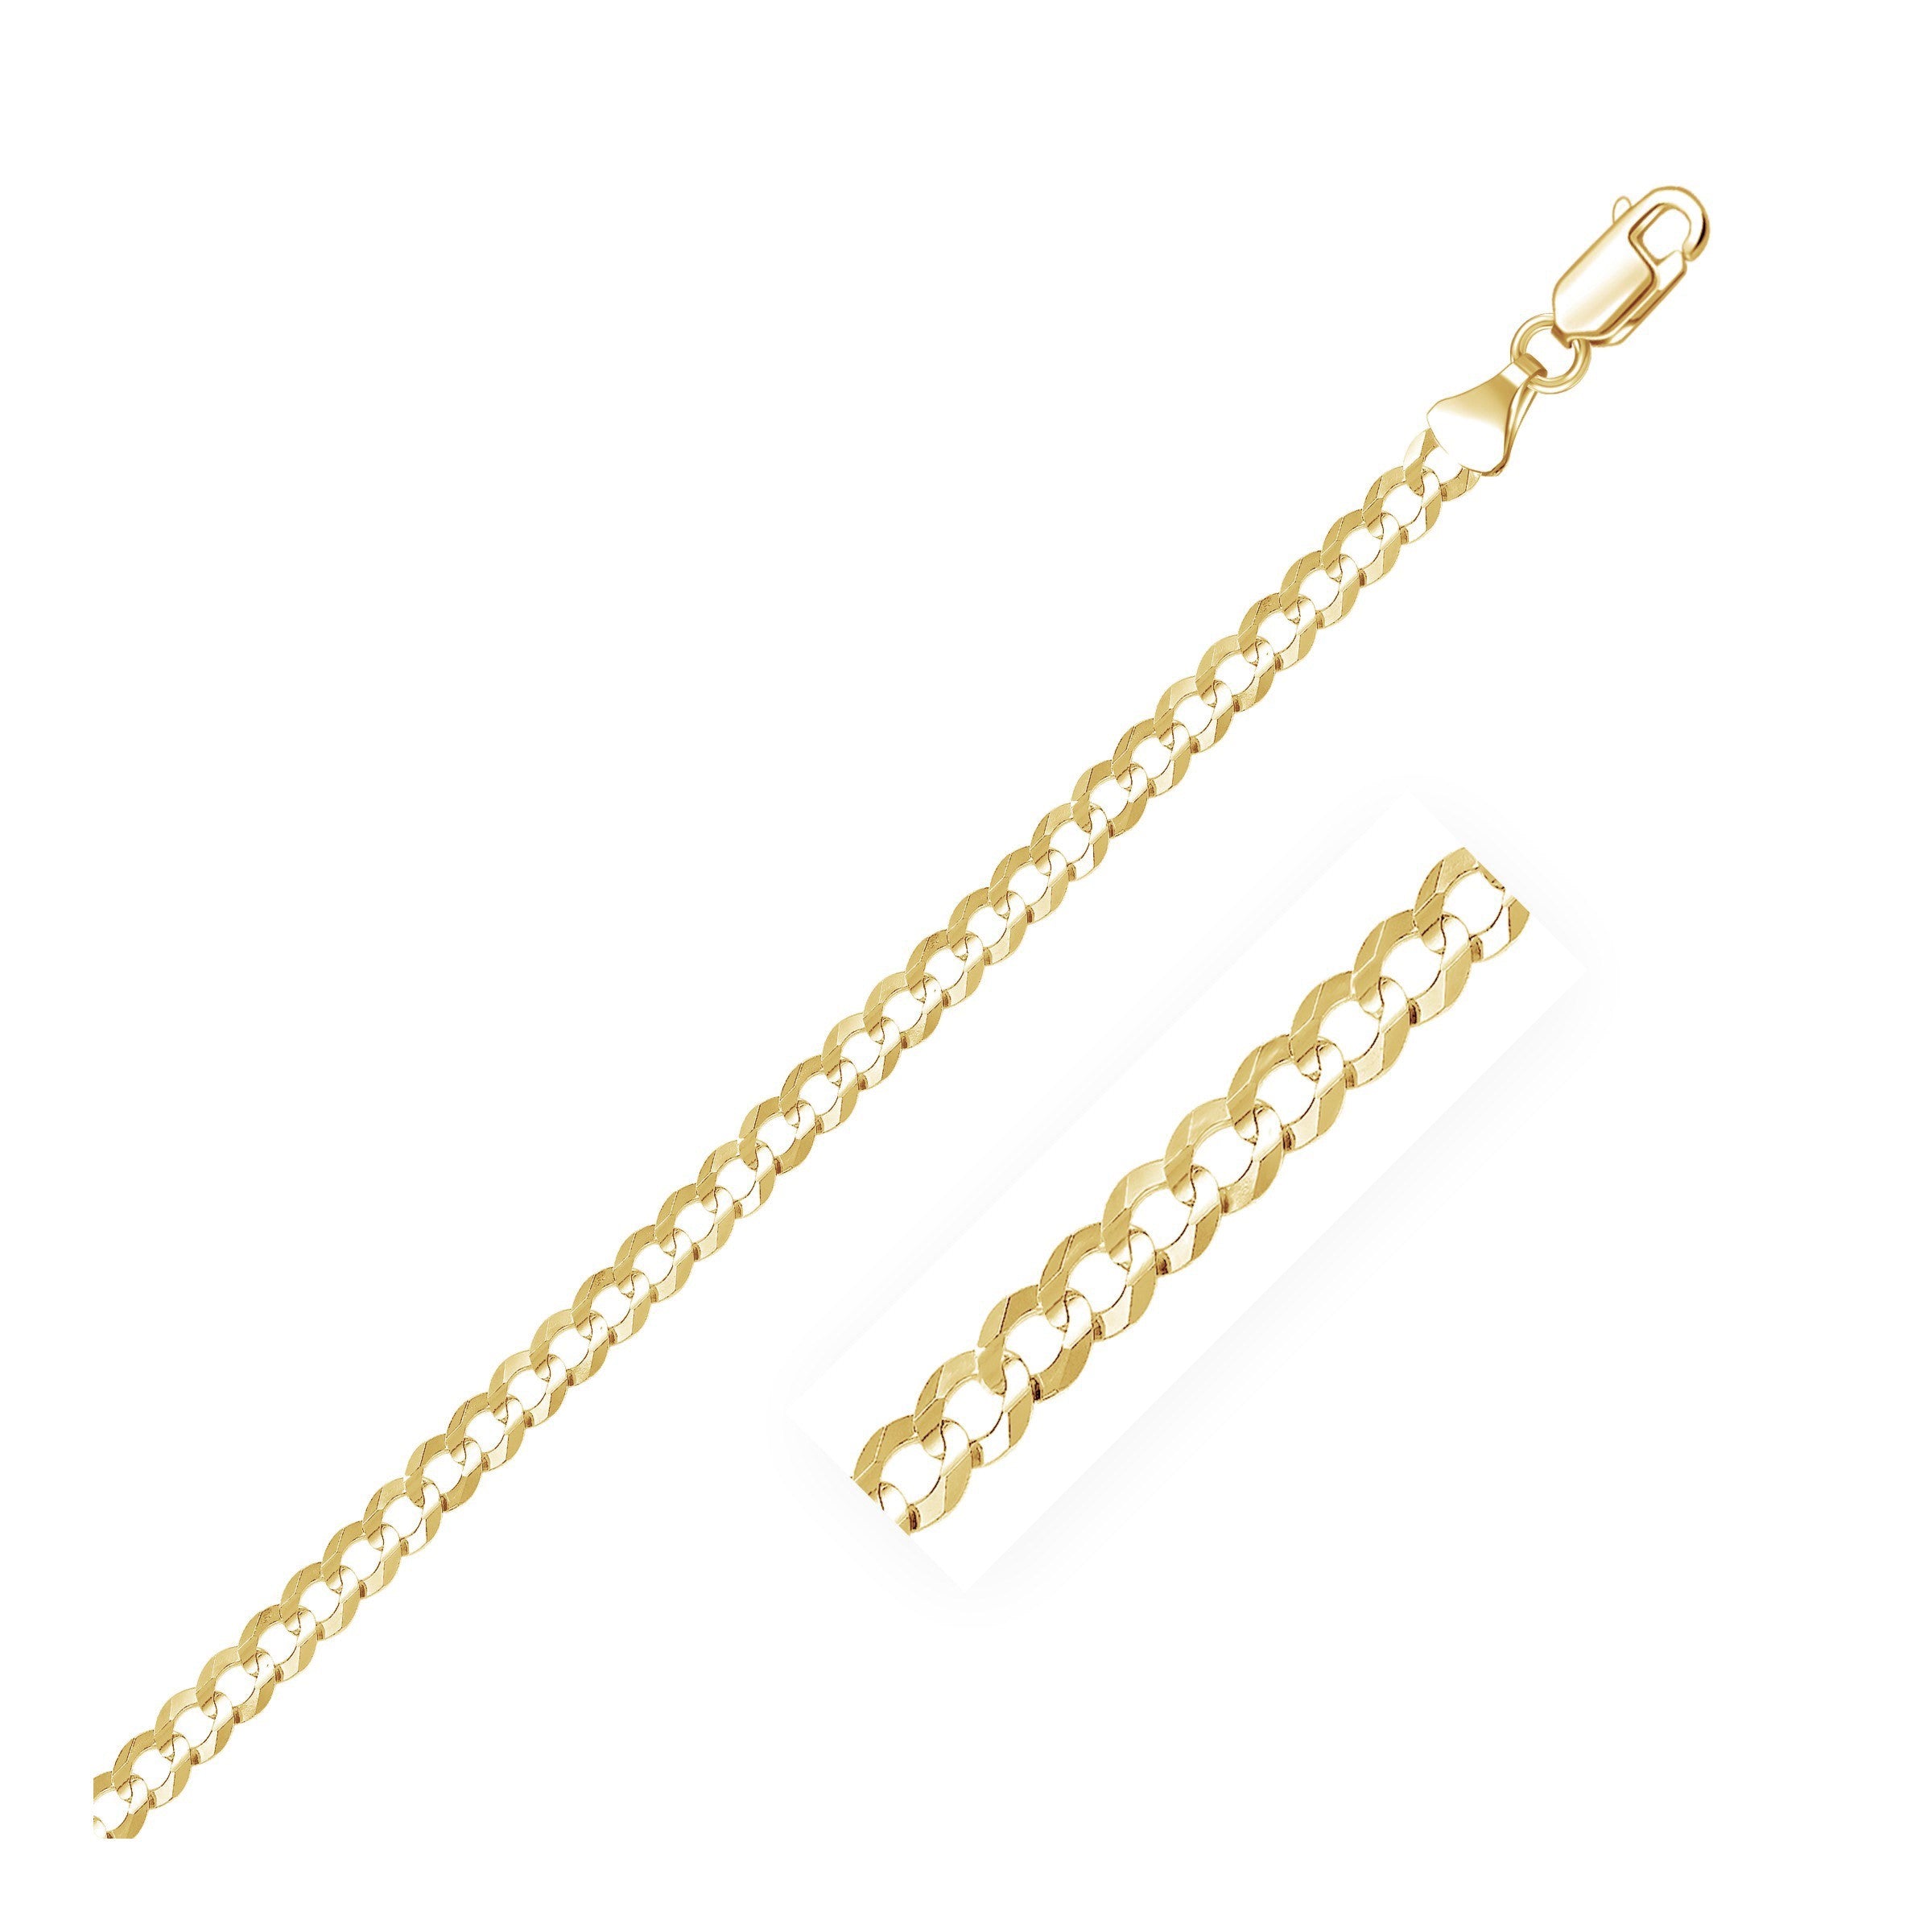 4 7Mm 10K Yellow Gold Curb Chain 39469-1